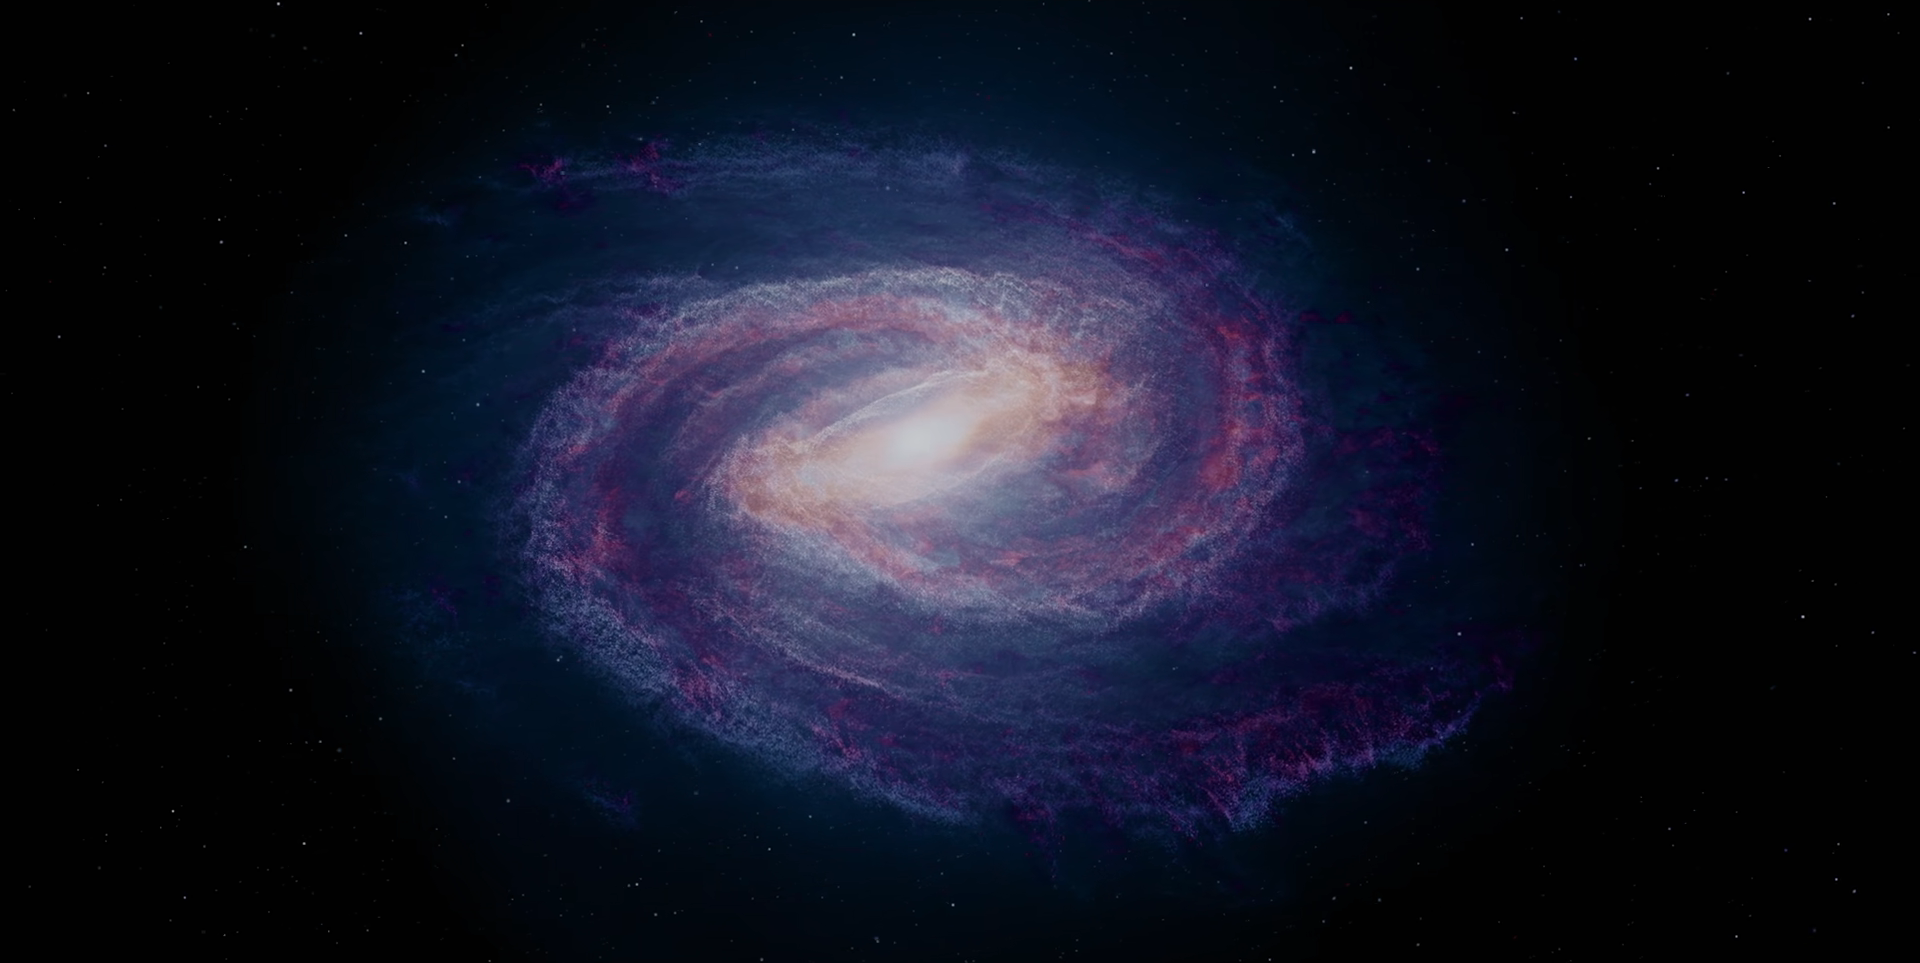 A visualization of the Milky Way